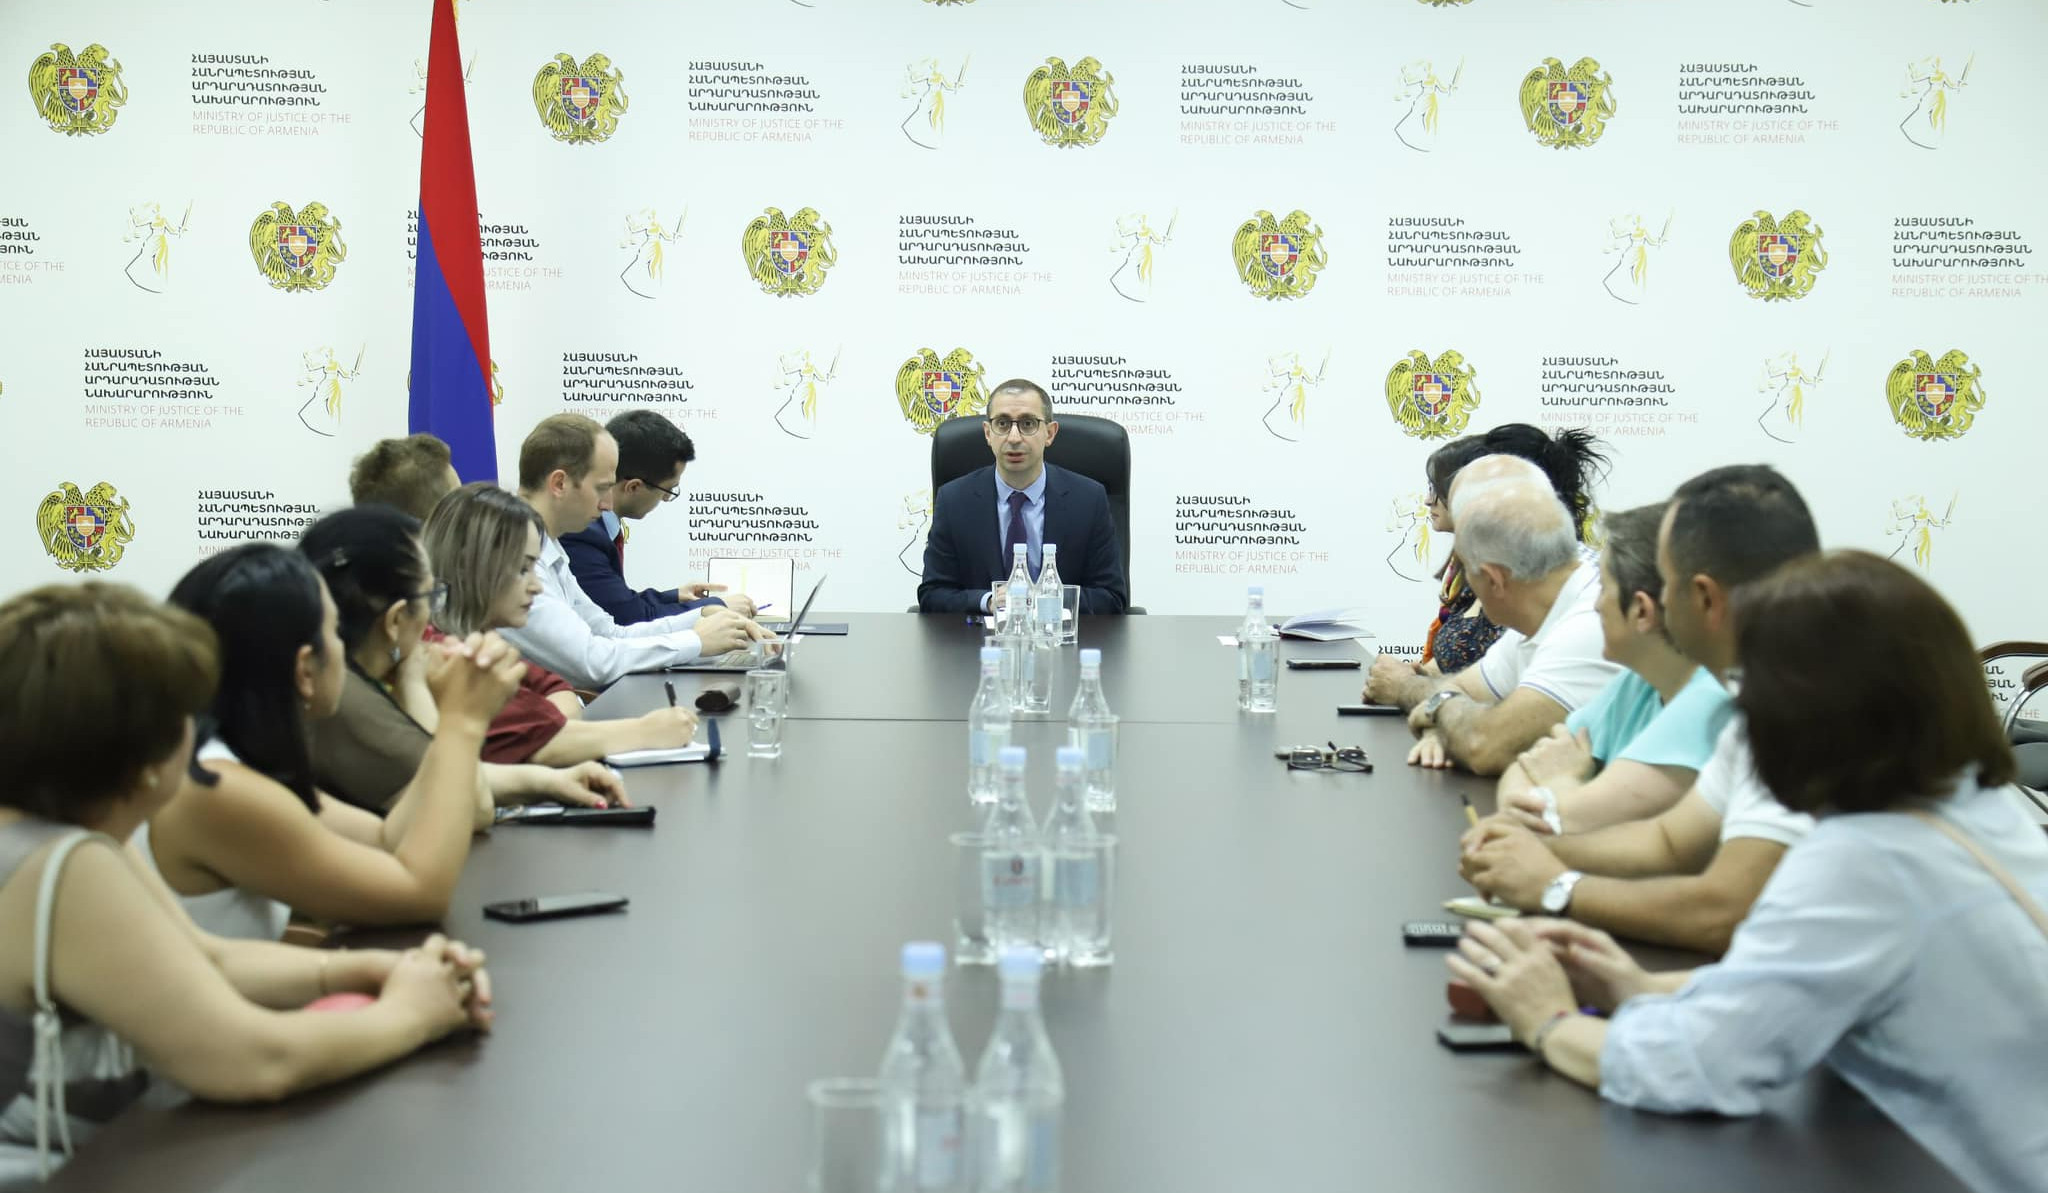 Issue of right of return of Armenian refugees deported from Azerbaijan SSR, Nakhijevan and Nagorno-Karabakh discussed